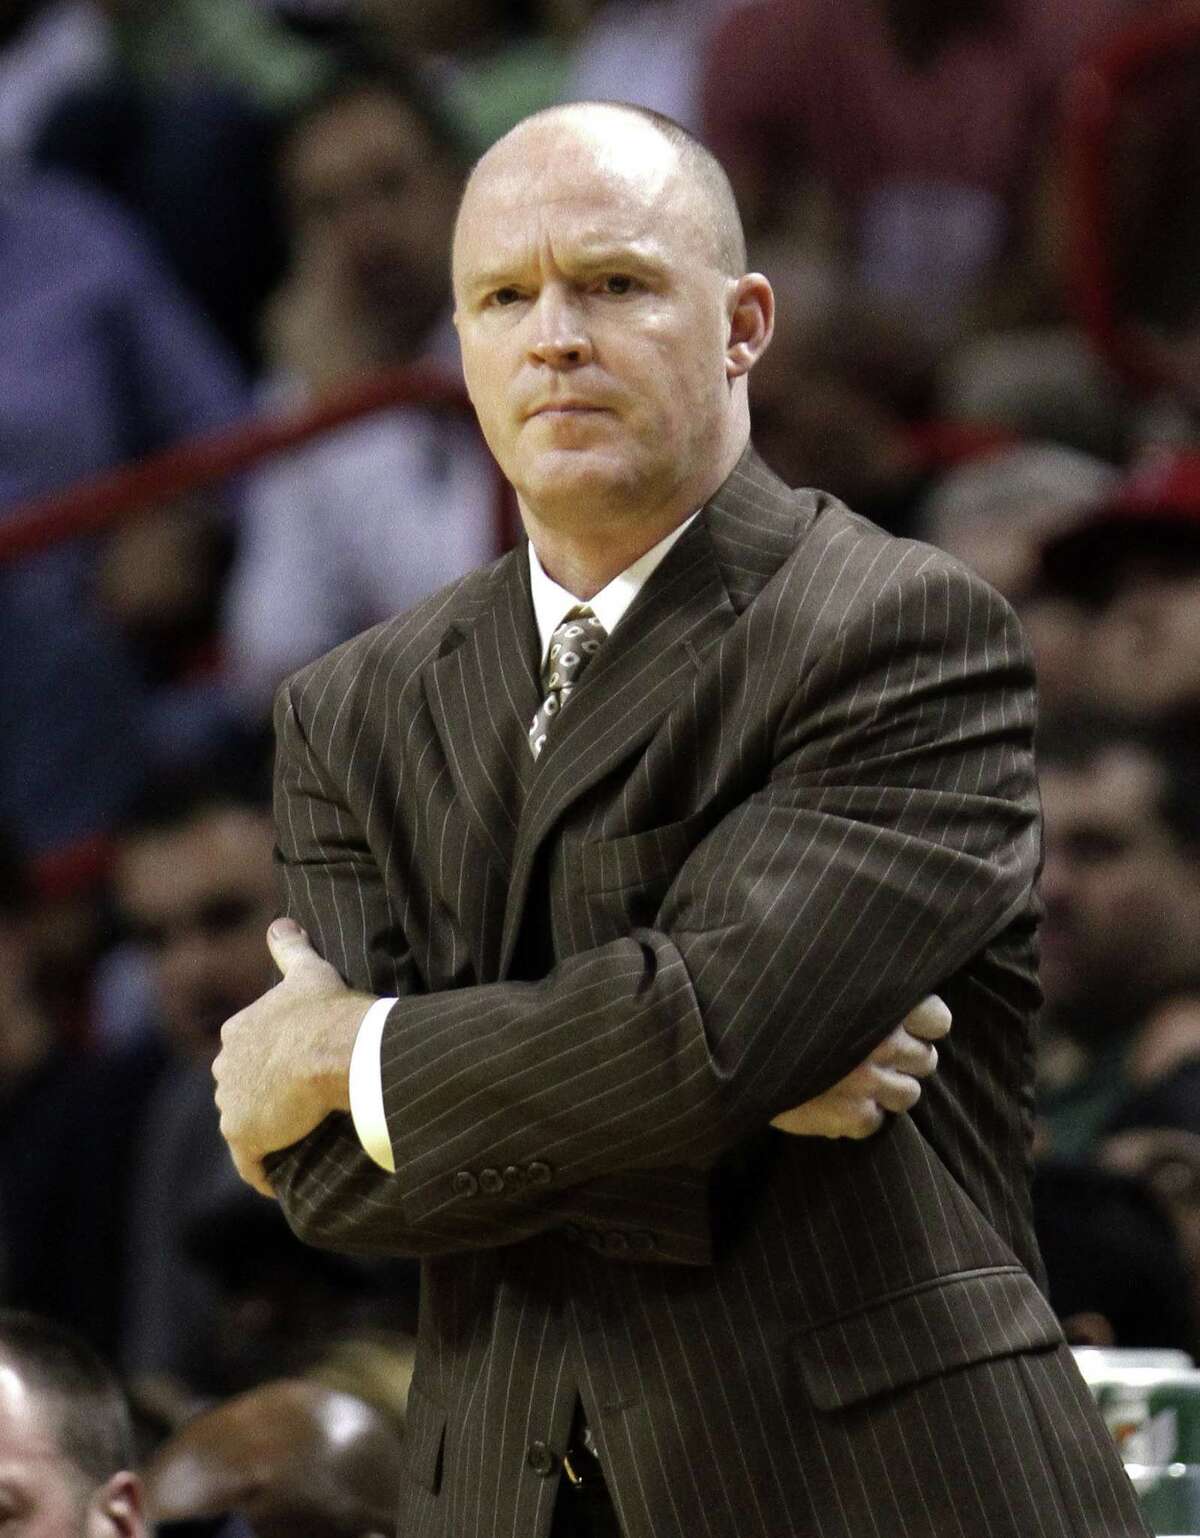 The Orlando Magic hired former player Scott Skiles as head coach on Friday.